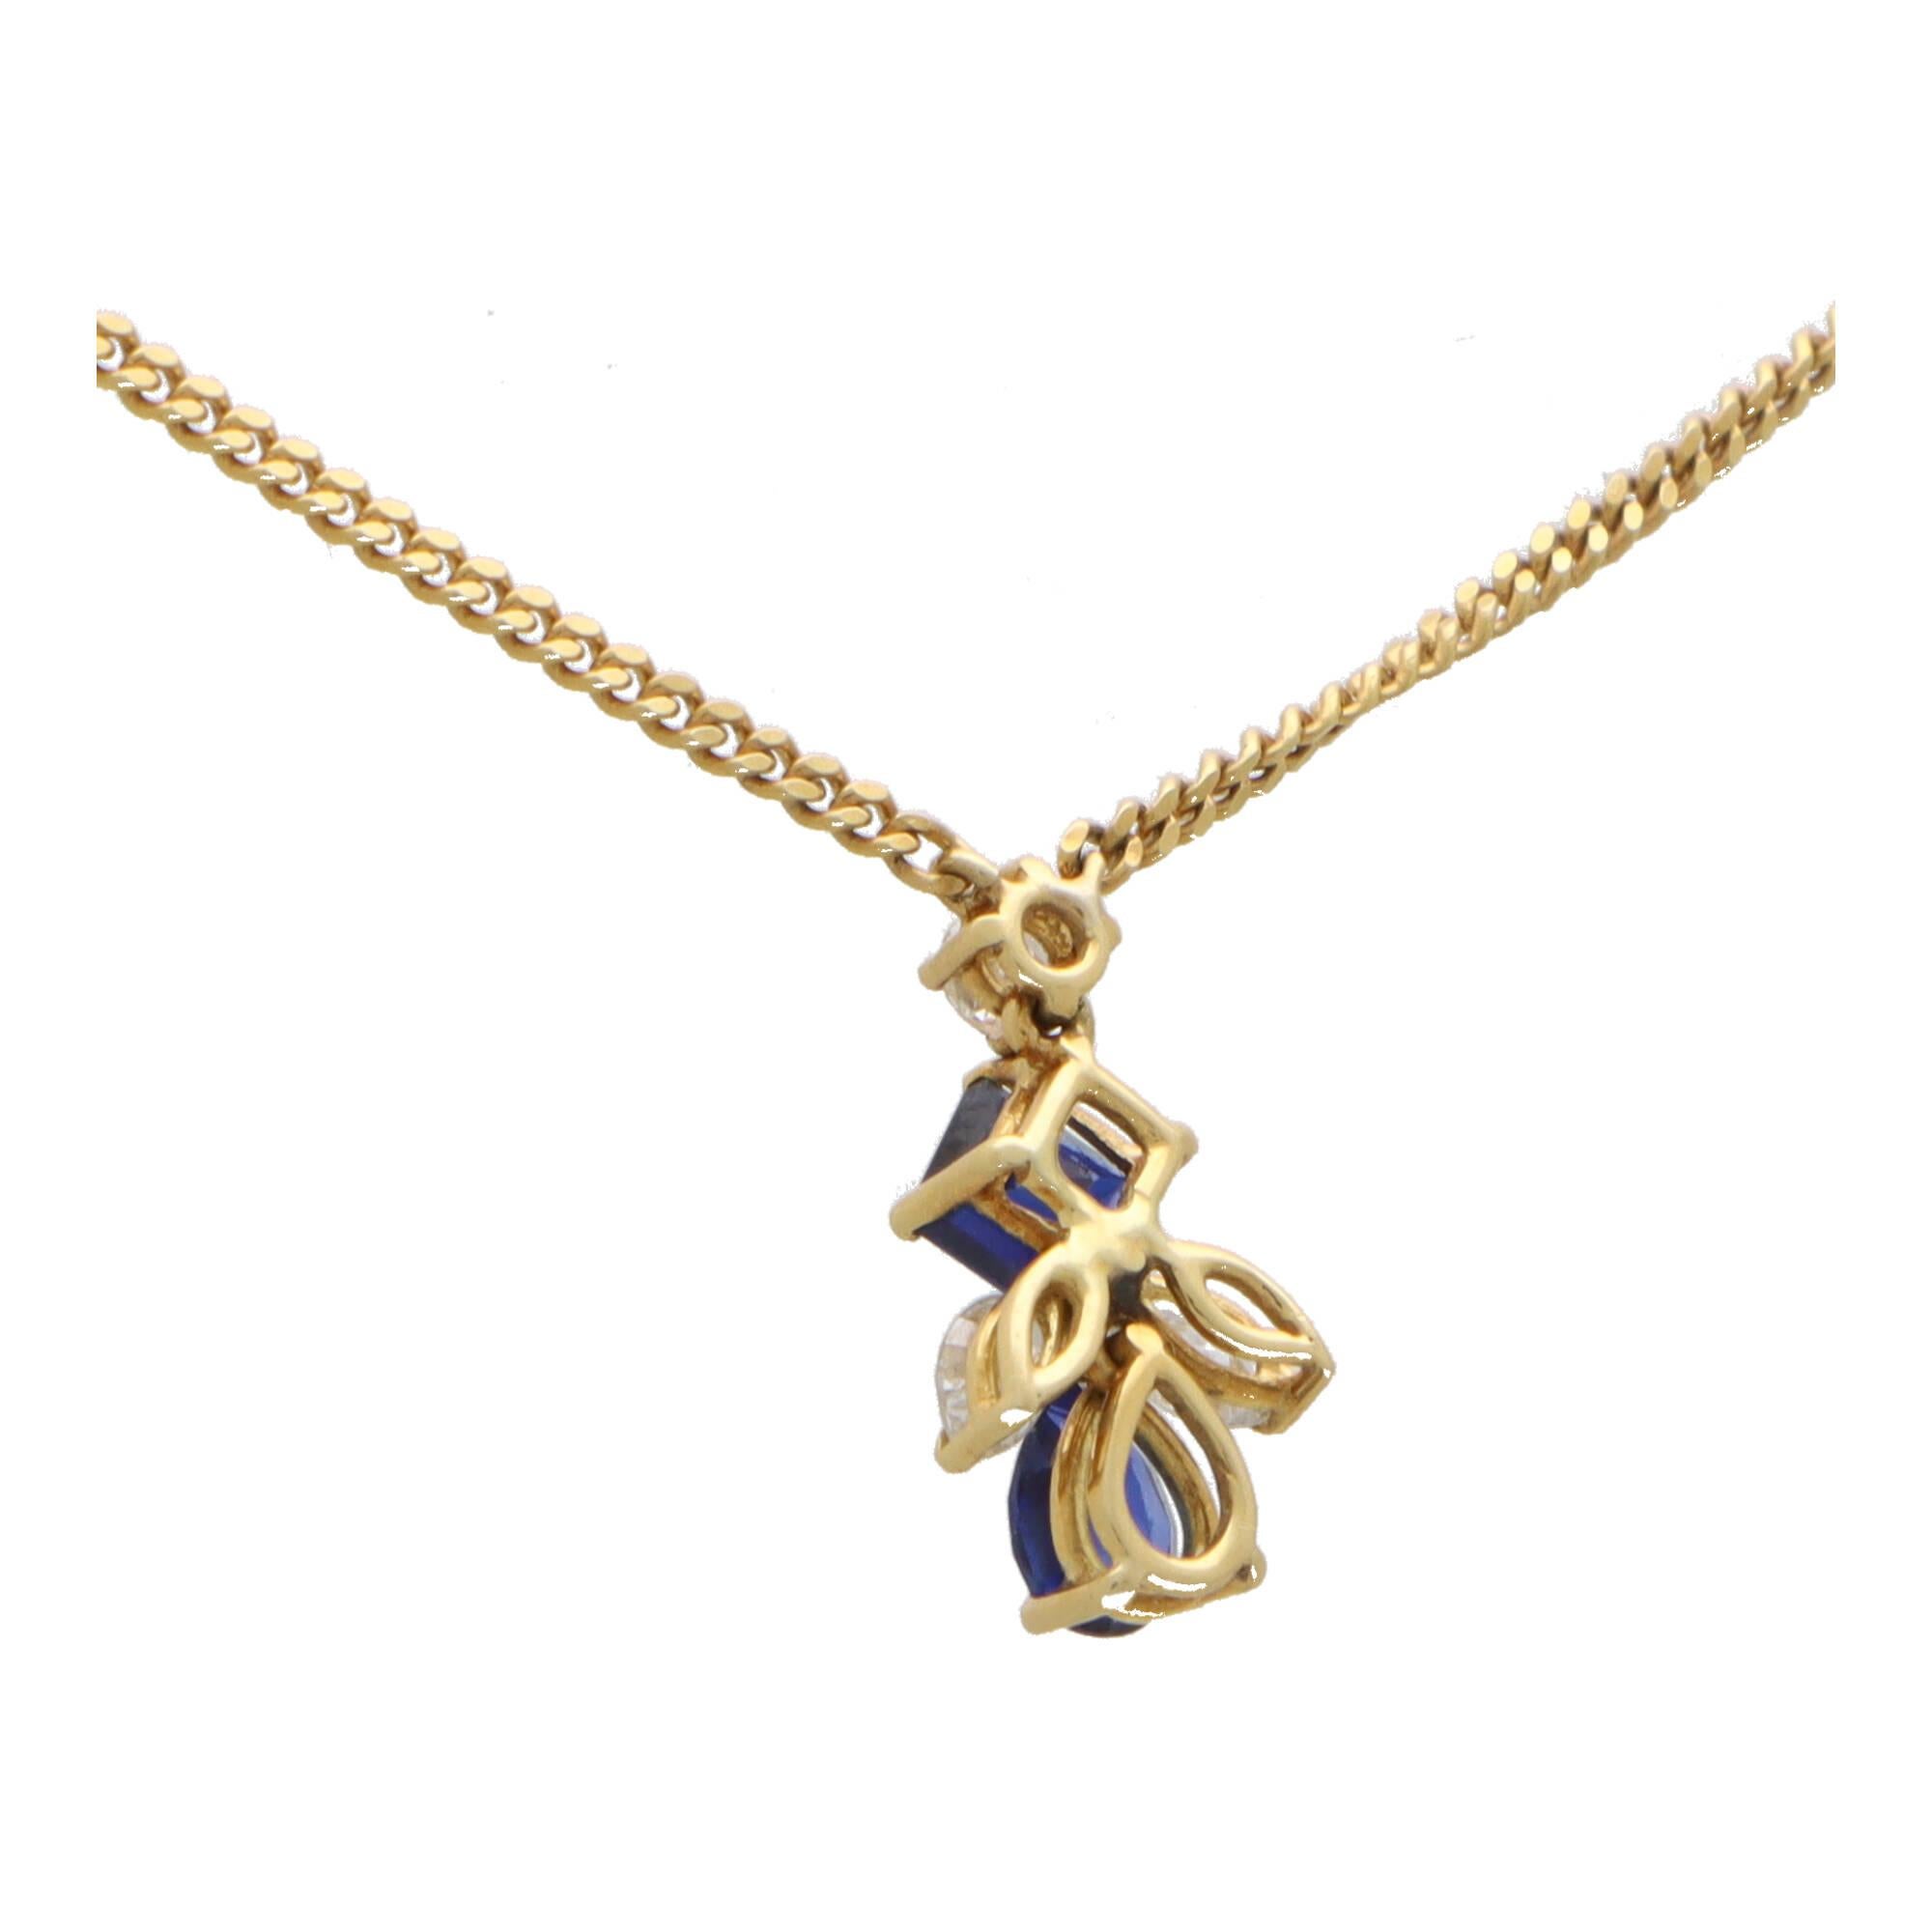  Vintage Sapphire and Diamond Abstract Pendant Necklace Set in 18k Yellow Gold In Excellent Condition For Sale In London, GB